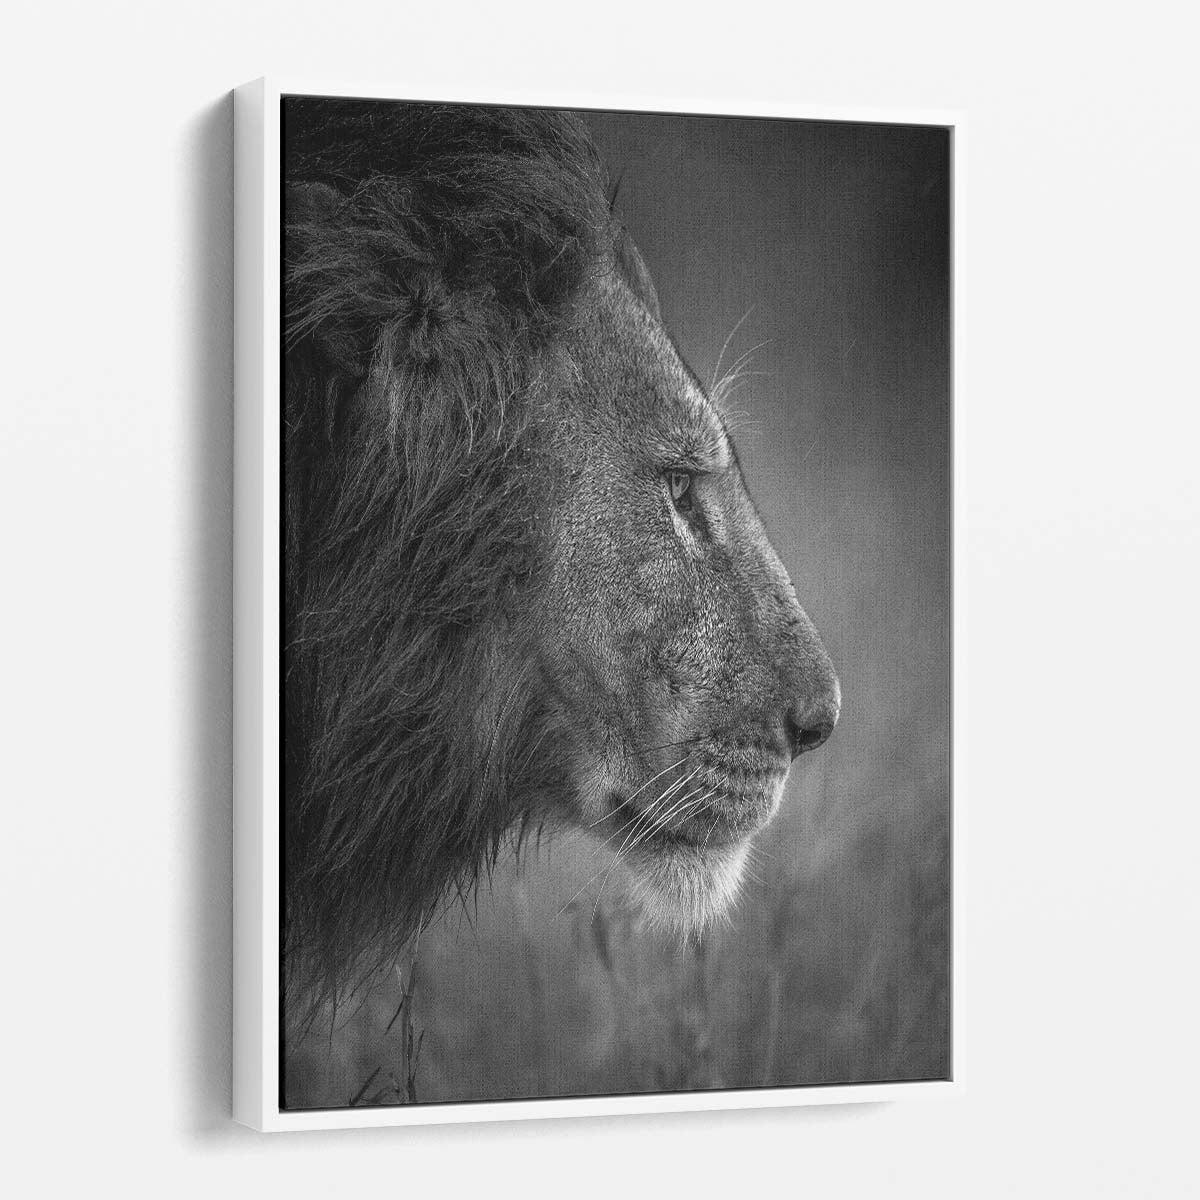 Kenyan Lion Close-Up, Monochrome Wildlife Photography in Rain by Luxuriance Designs, made in USA